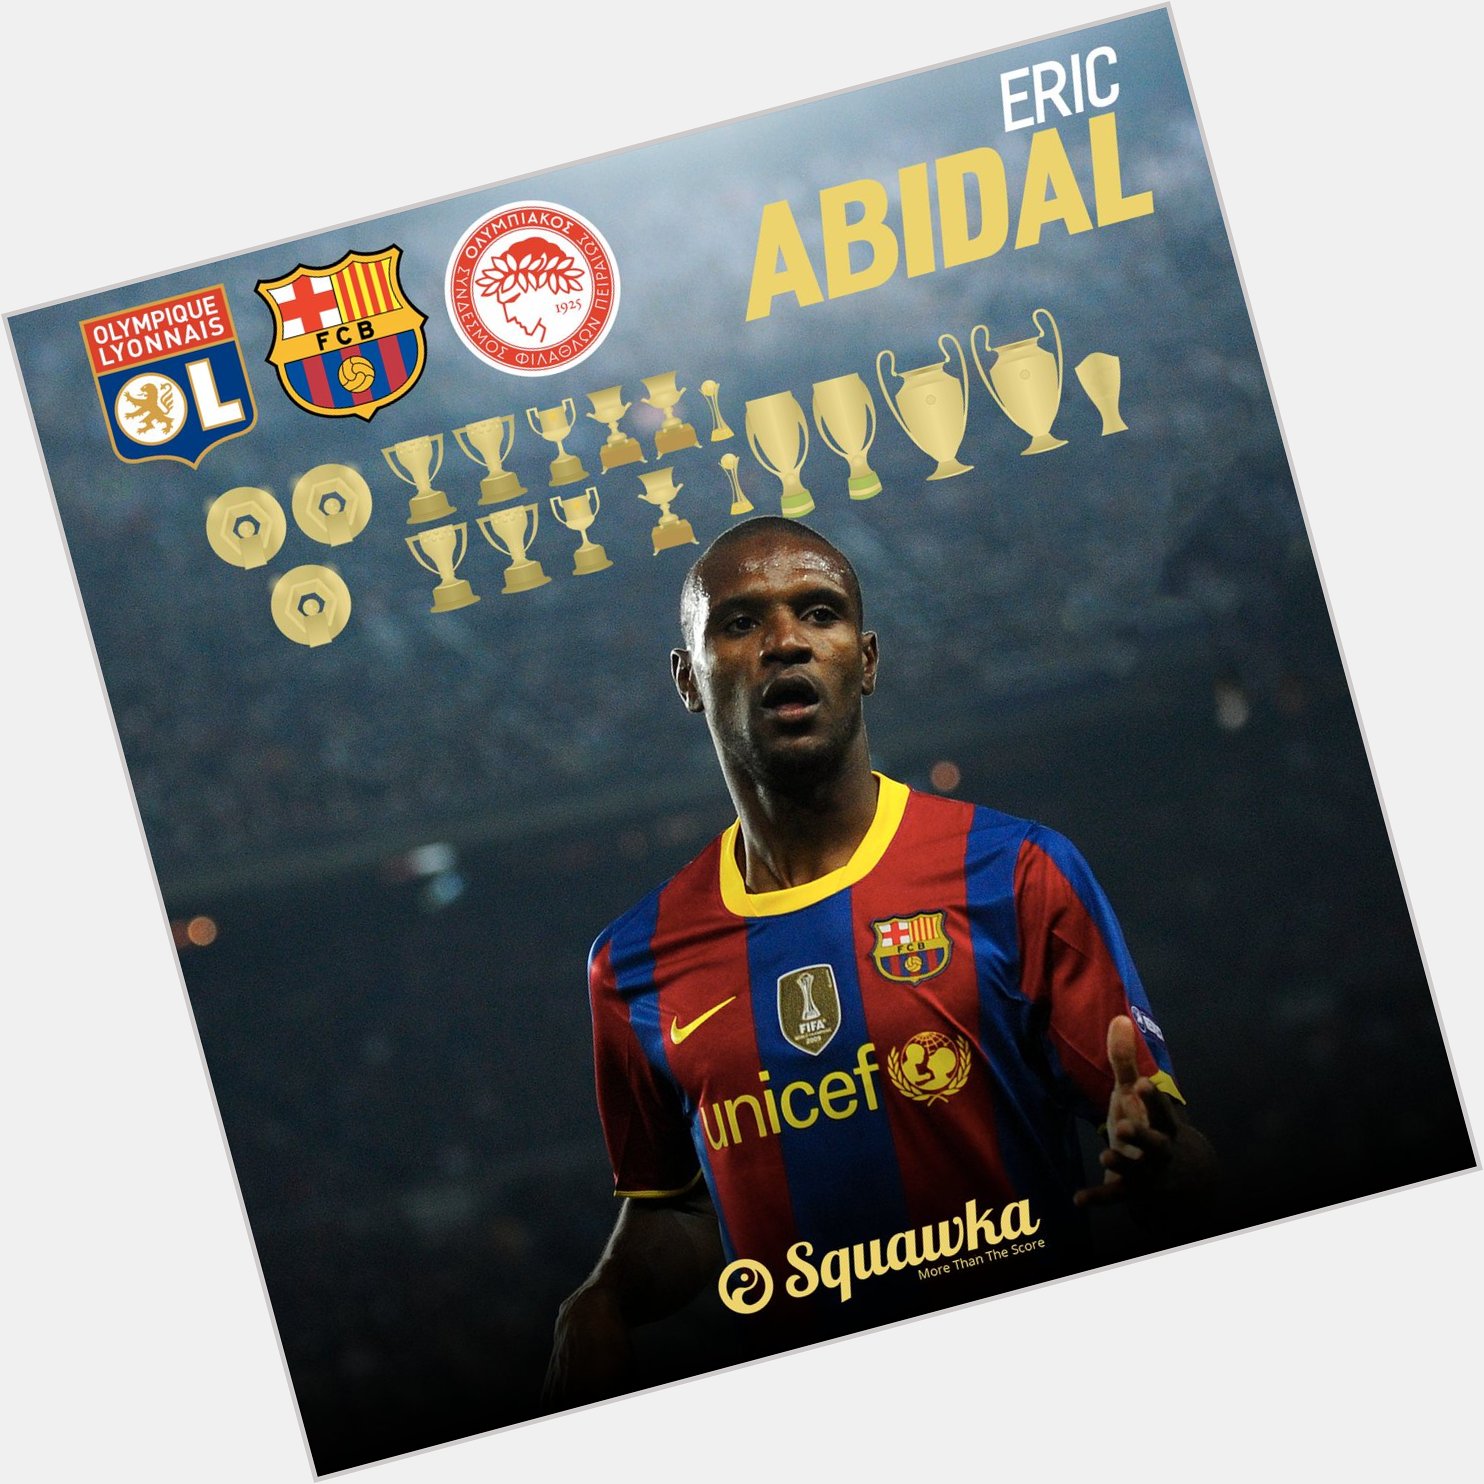 Happy 38th birthday to Éric Abidal.      LaLiga   Ligue 1  Champions League

18 career trophies in total. 